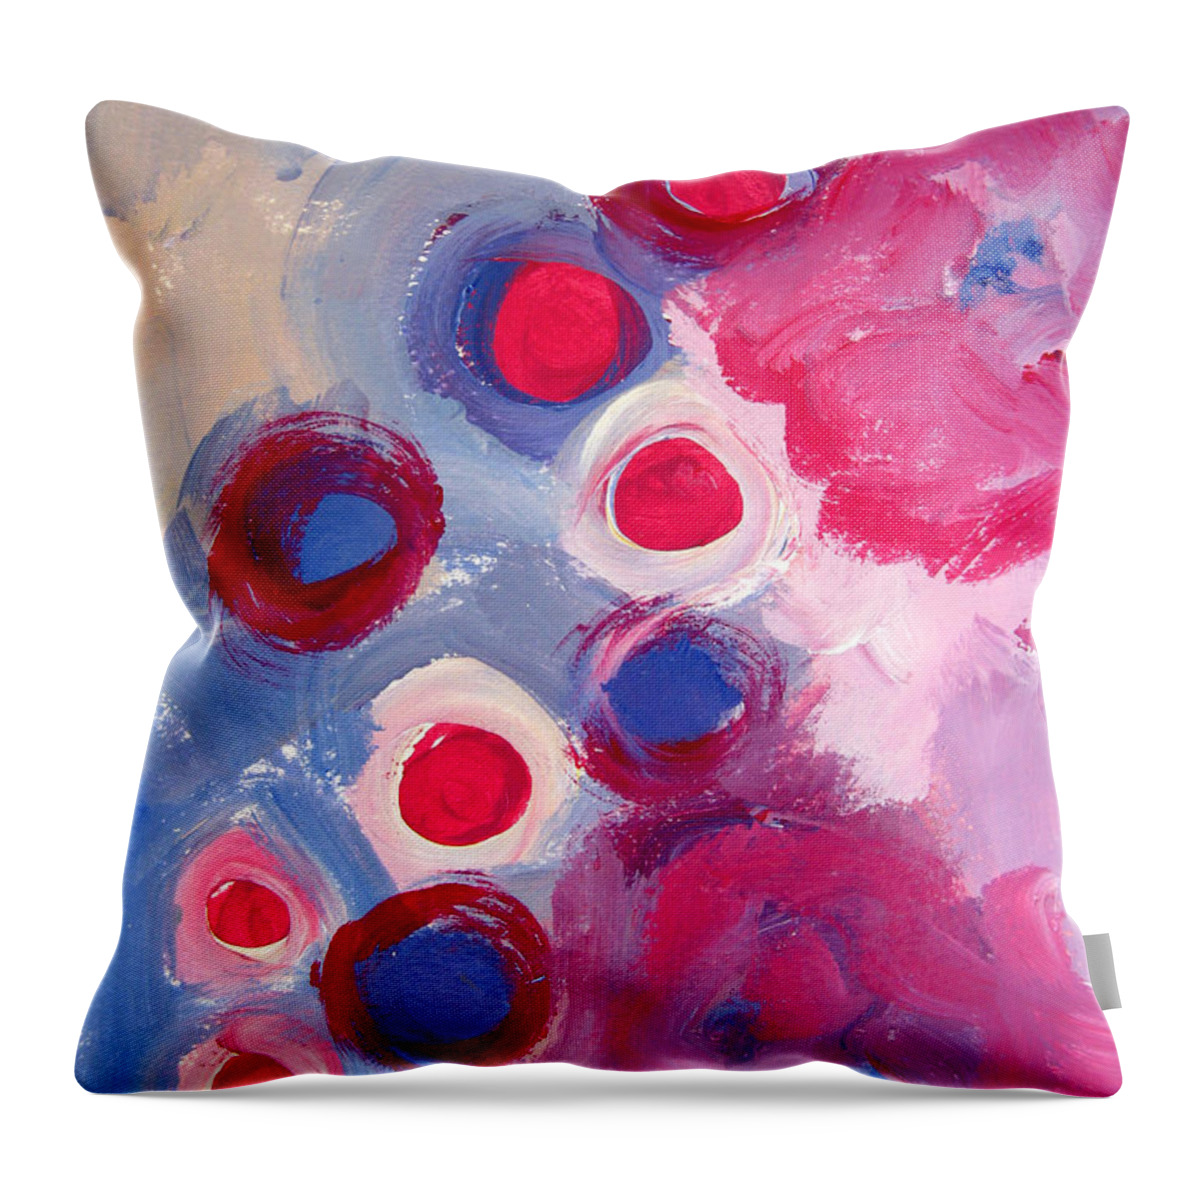 Abstract Art Throw Pillow featuring the painting Abstract VI by Patricia Awapara